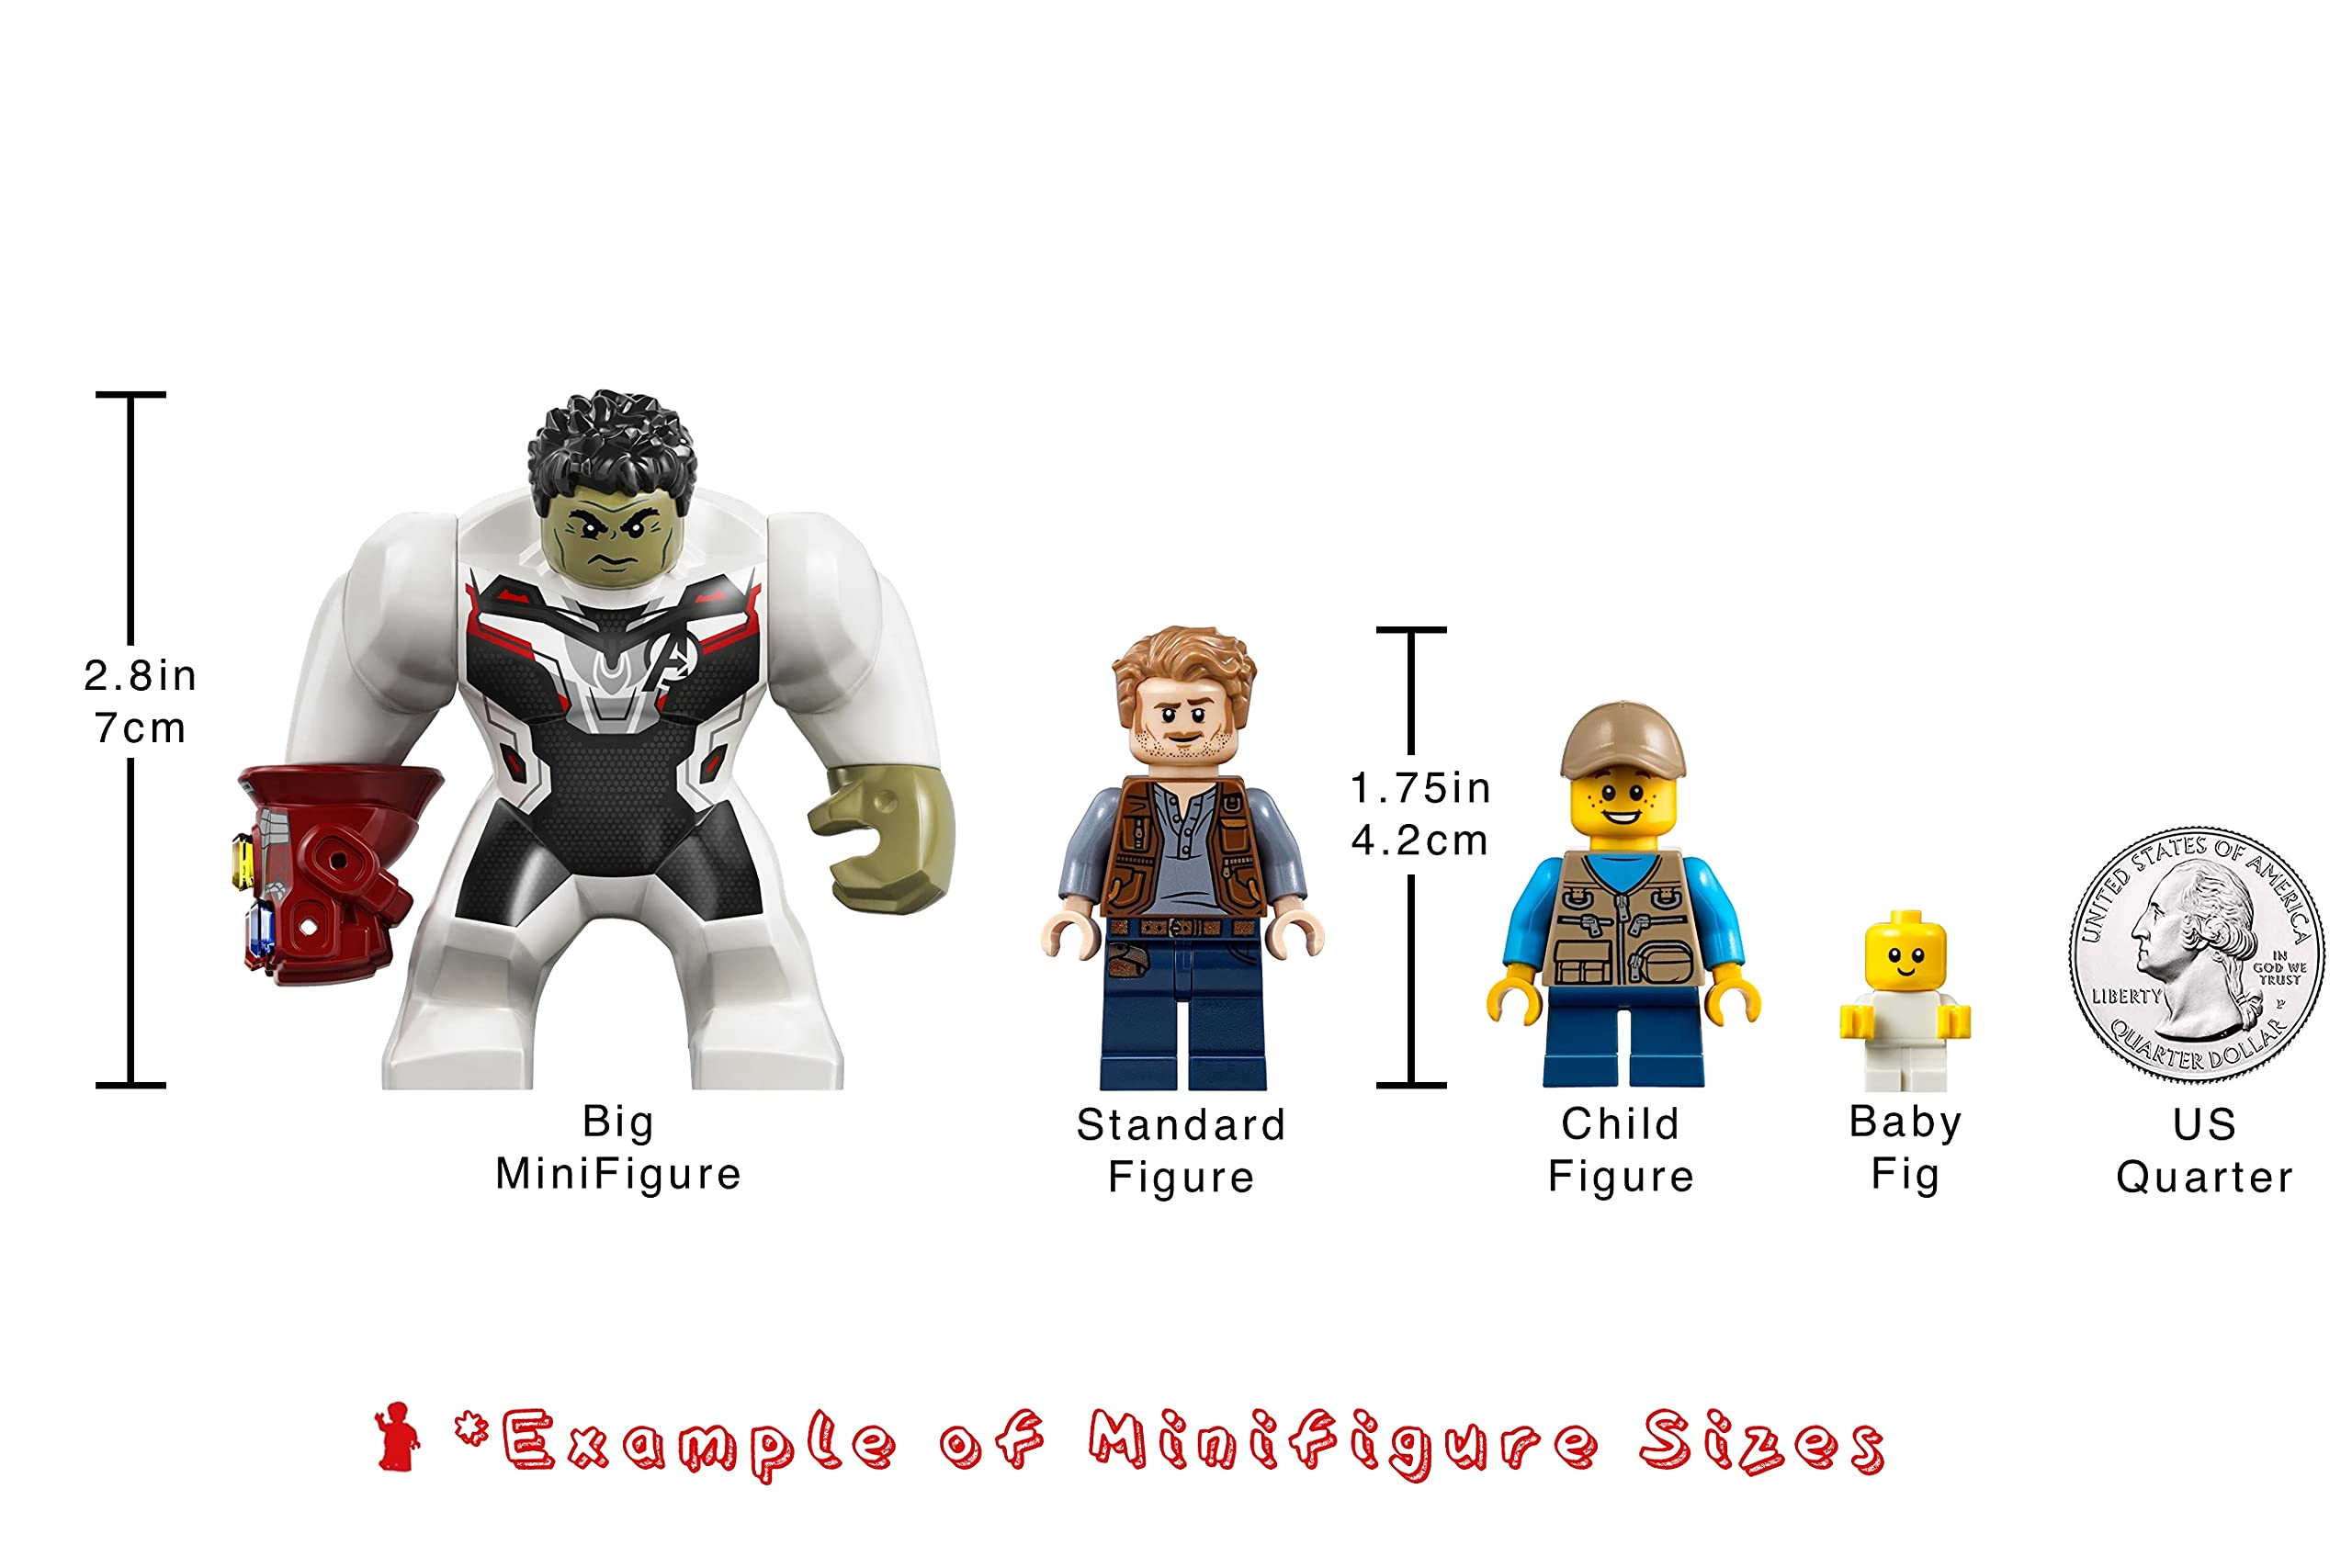 LEGO Marvel Super Heroes Avengers Infinity War Minifigure - Iron Rescue (Pepper Potts) in Red Armor with Drone 76164